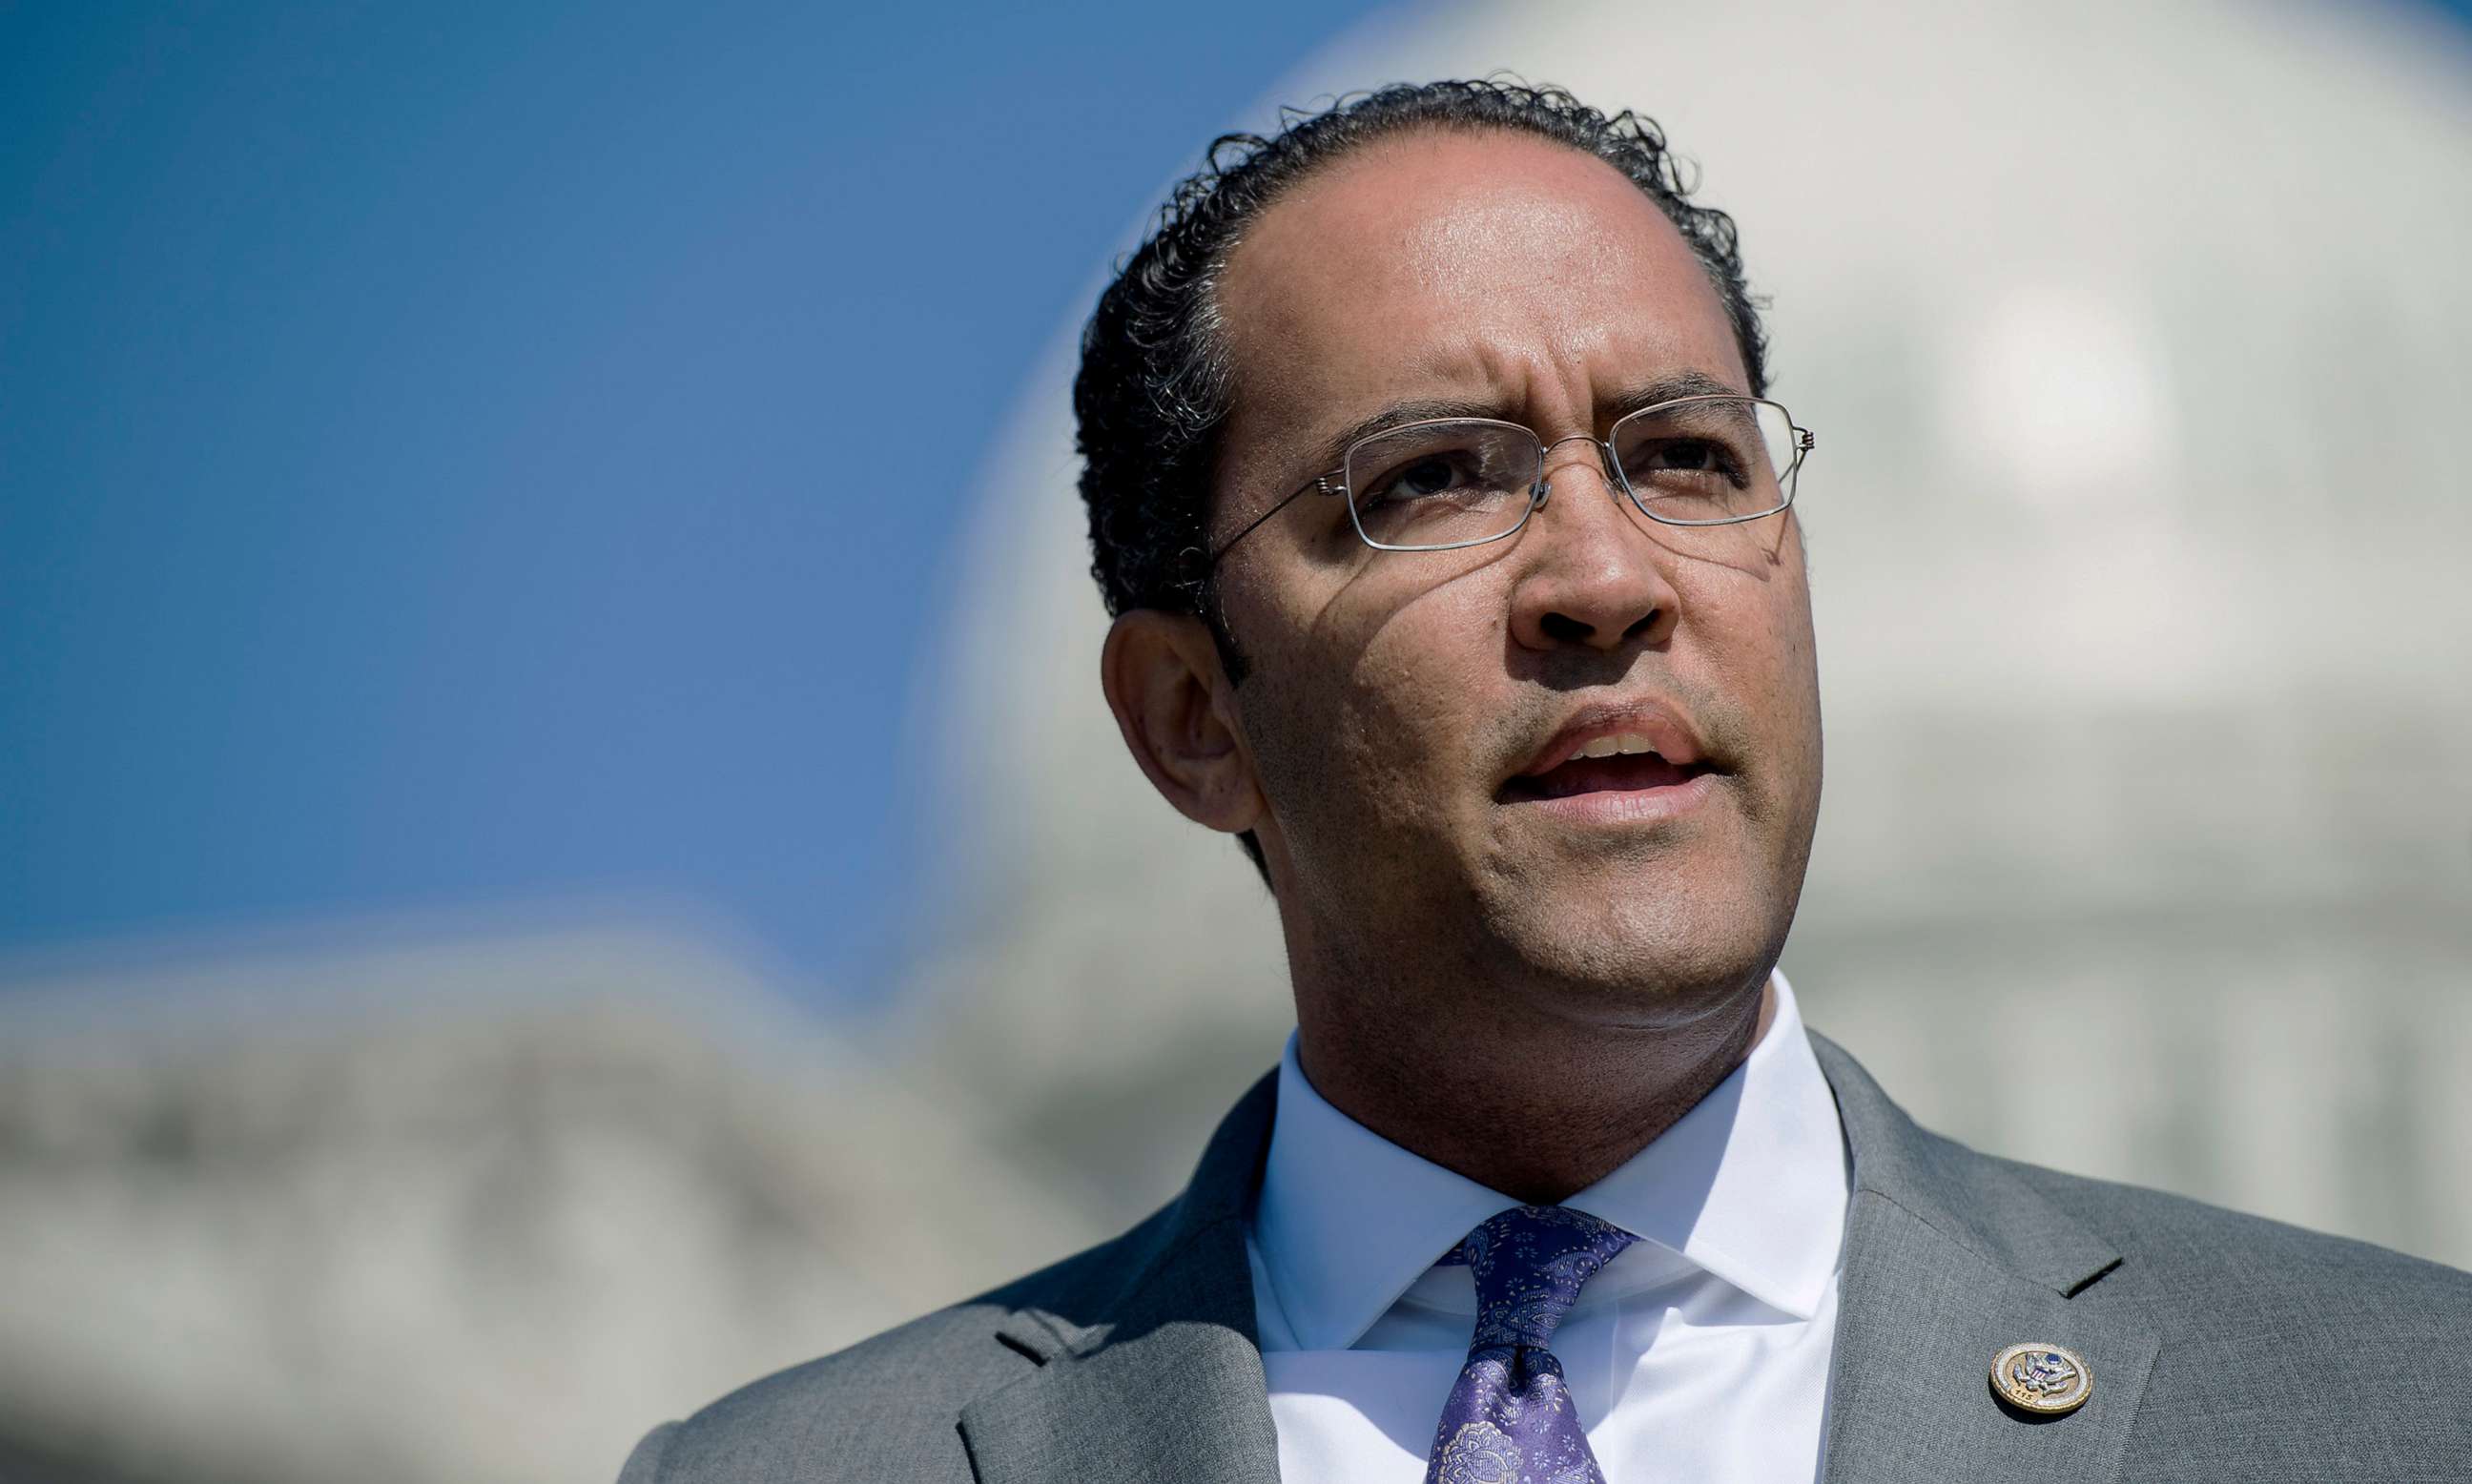 PHOTO: In this April 18, 2018, file photo, Rep. Will Hurd, speaks during a news conference in Washington, D.C.